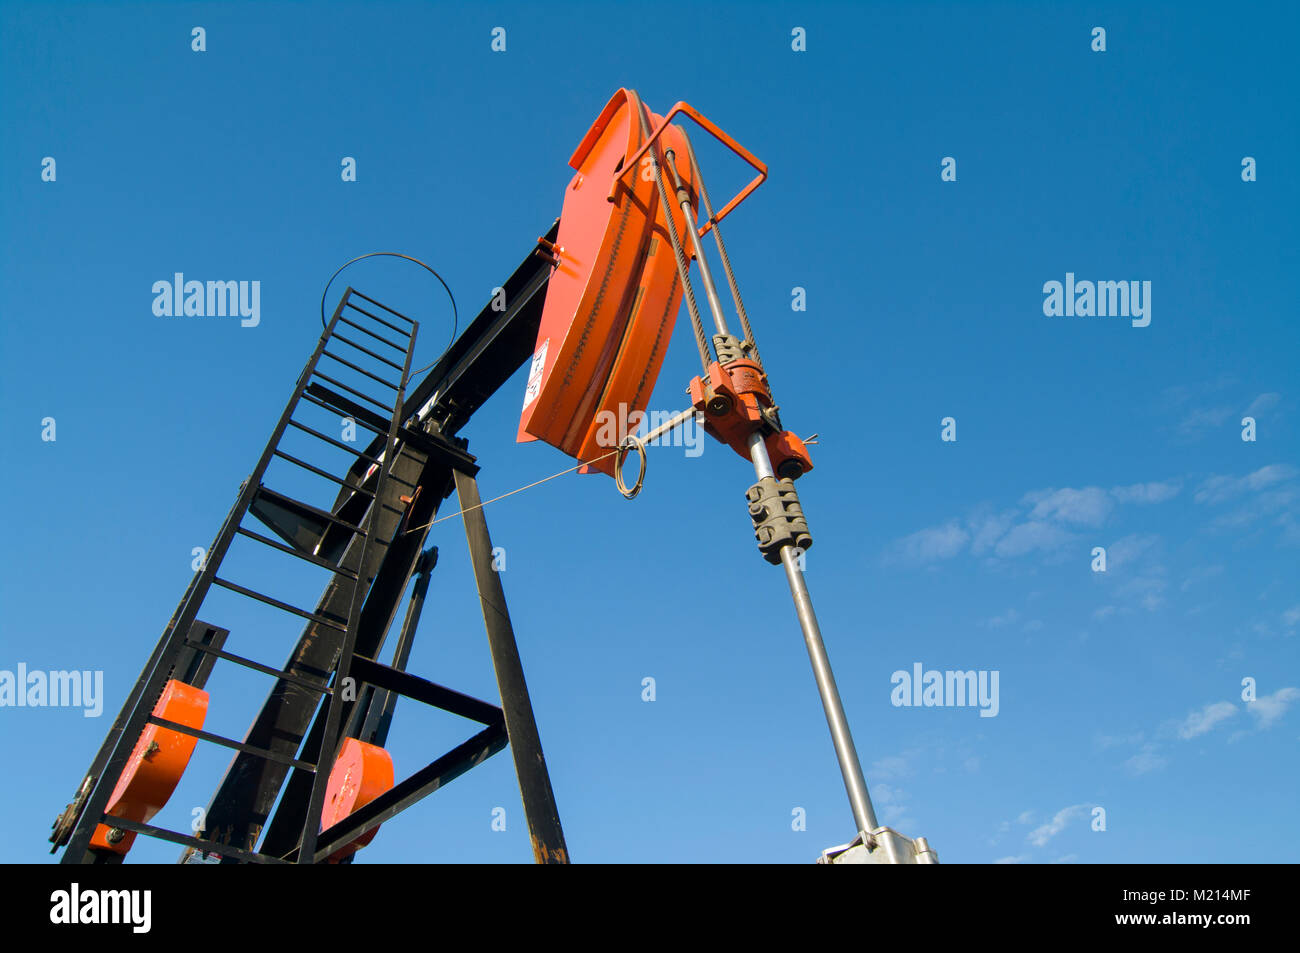 Looking up at an angle at the horsehead of an oil well pumpjack against a blue sky Stock Photo